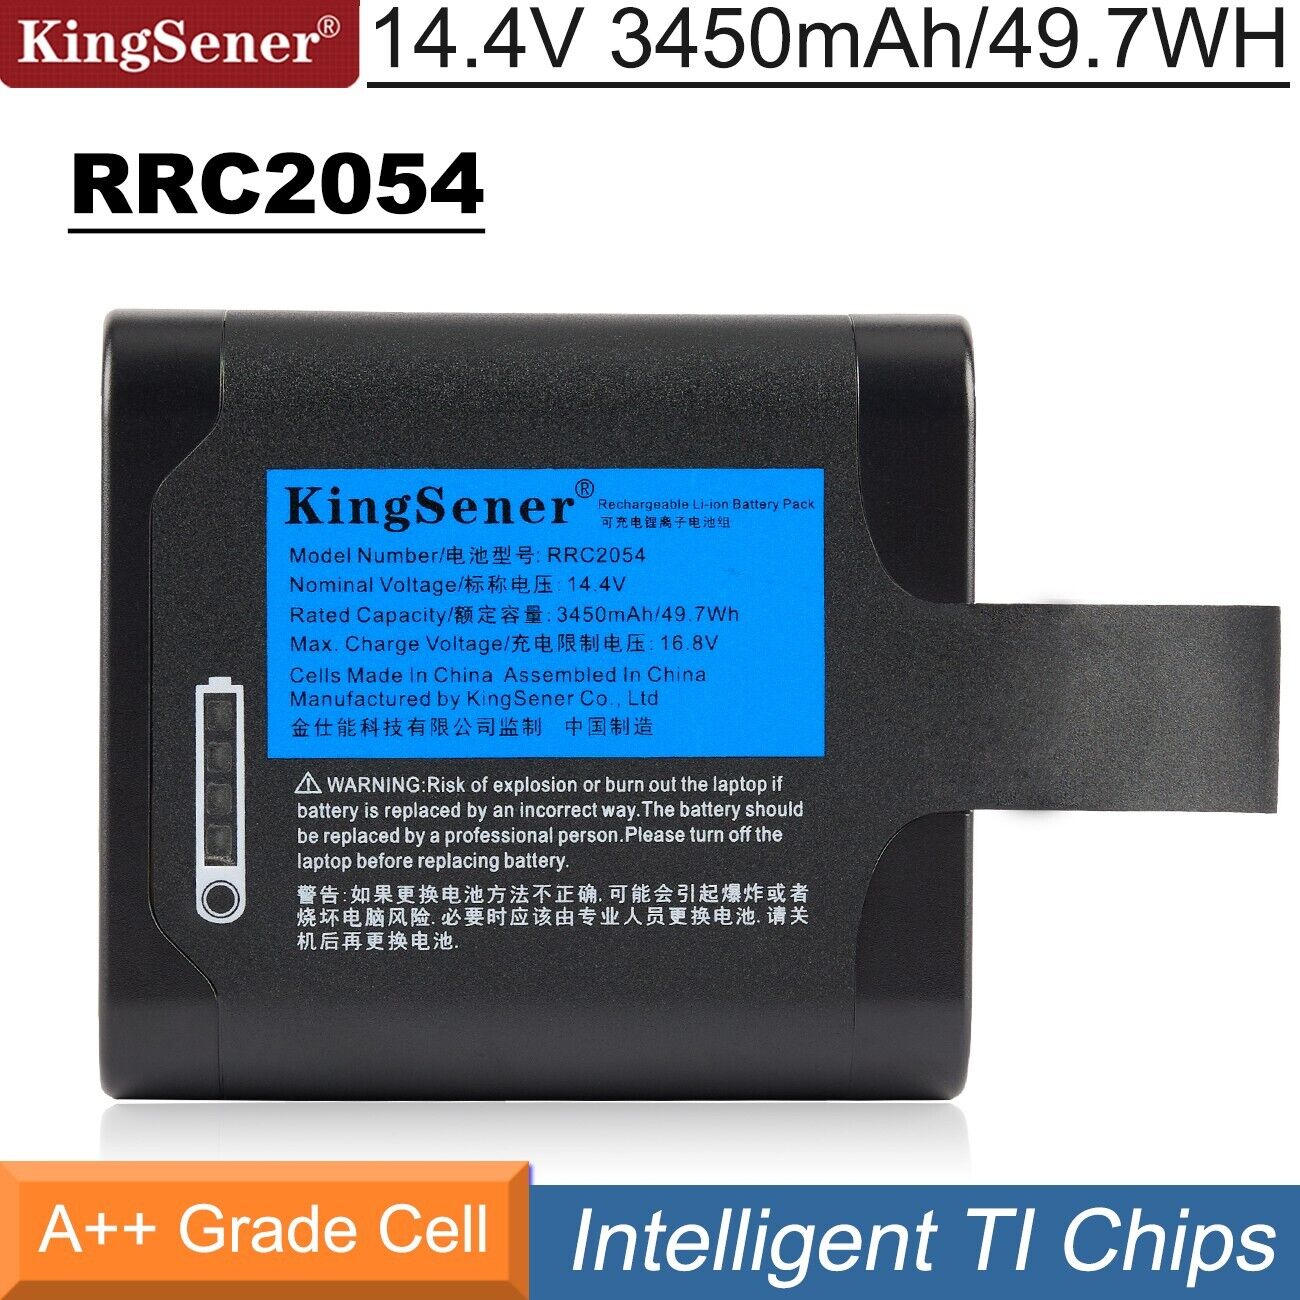 RRC2054 Li-Ion Smart Battery For RRC Industrial Controller Battery Pack 49.7WH